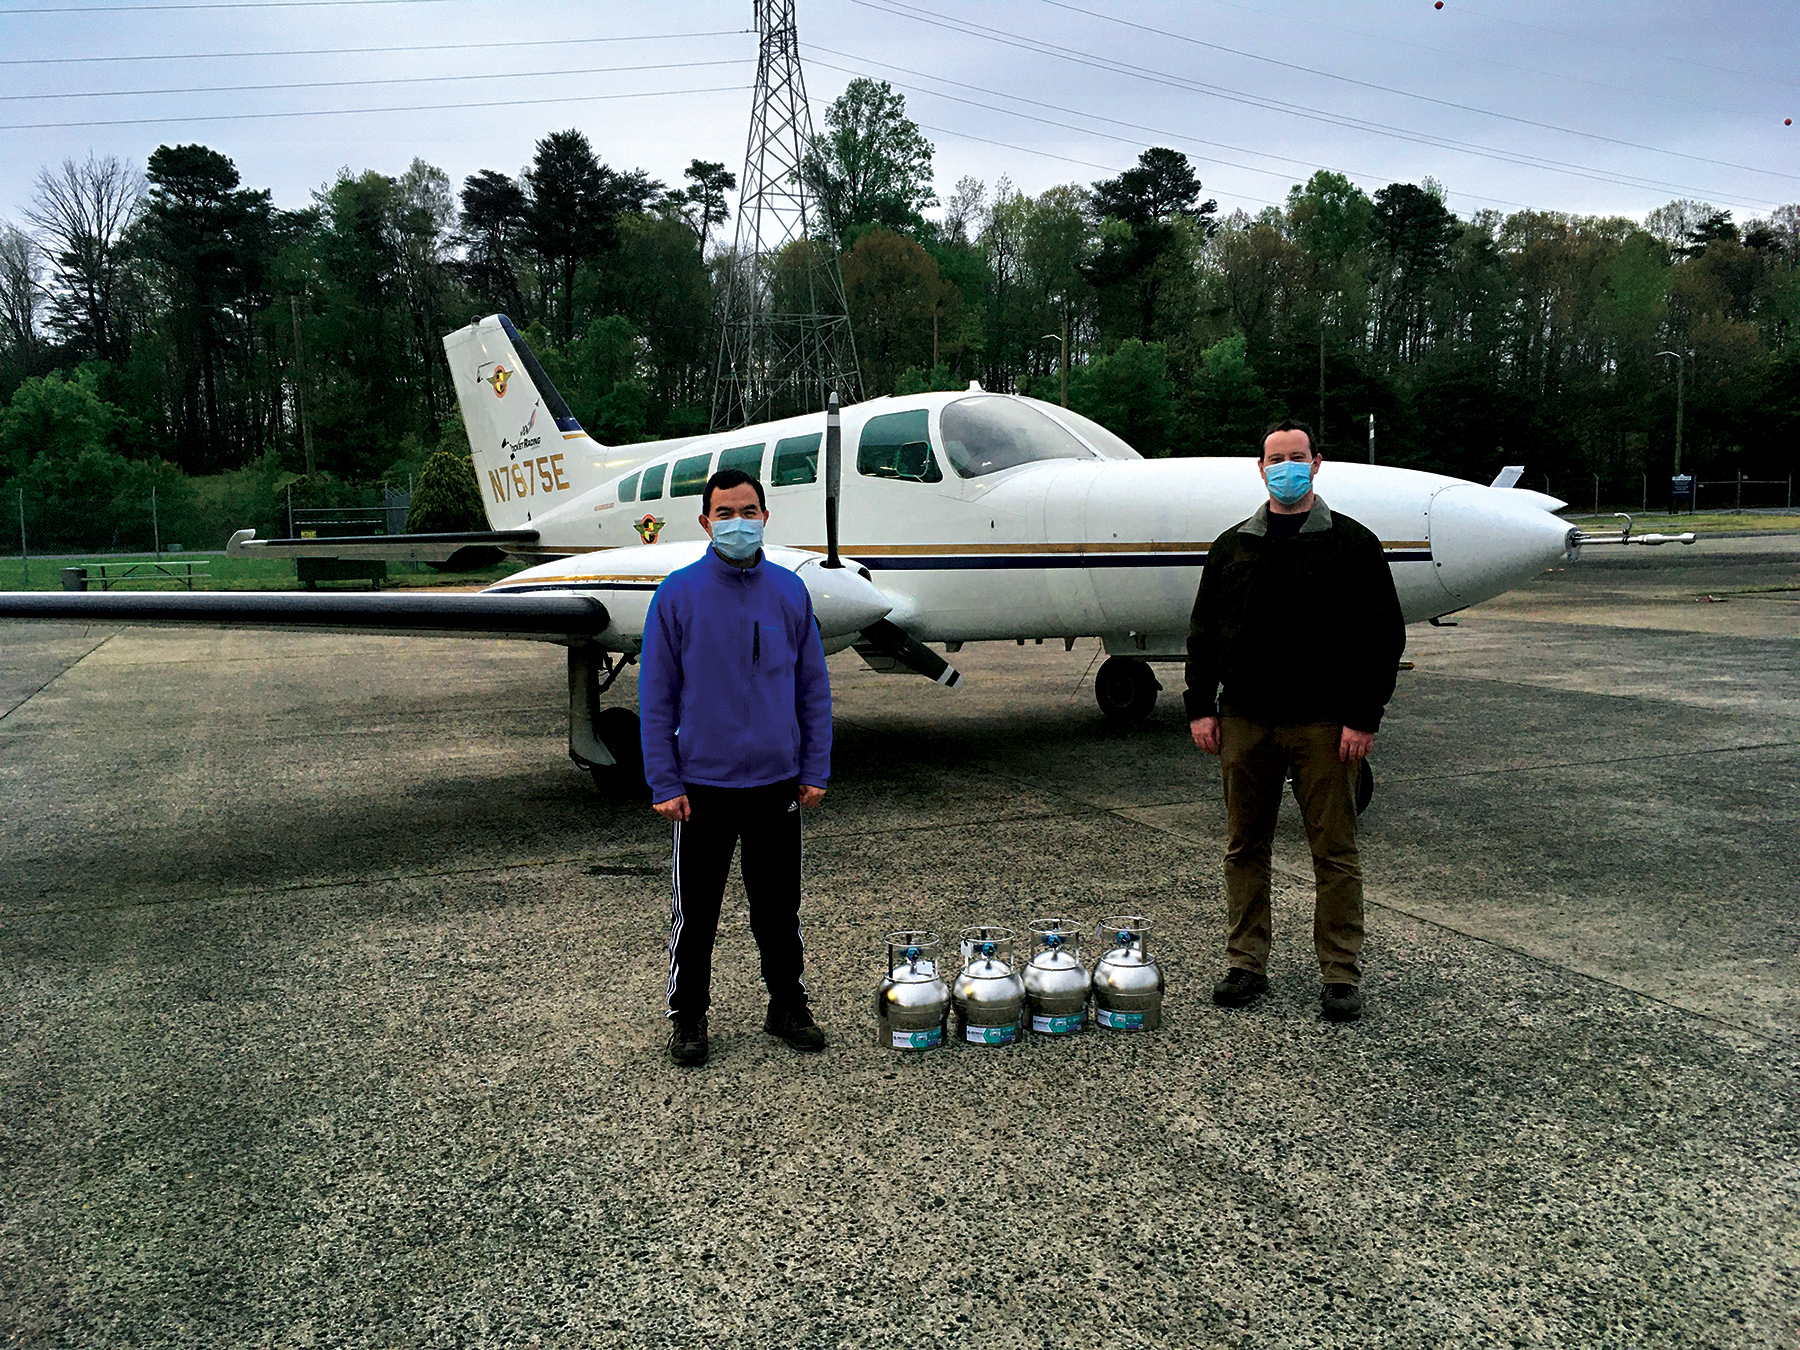 (L-R) Xinrong Ren and Phillip Stratton standing in front of a small white plane.